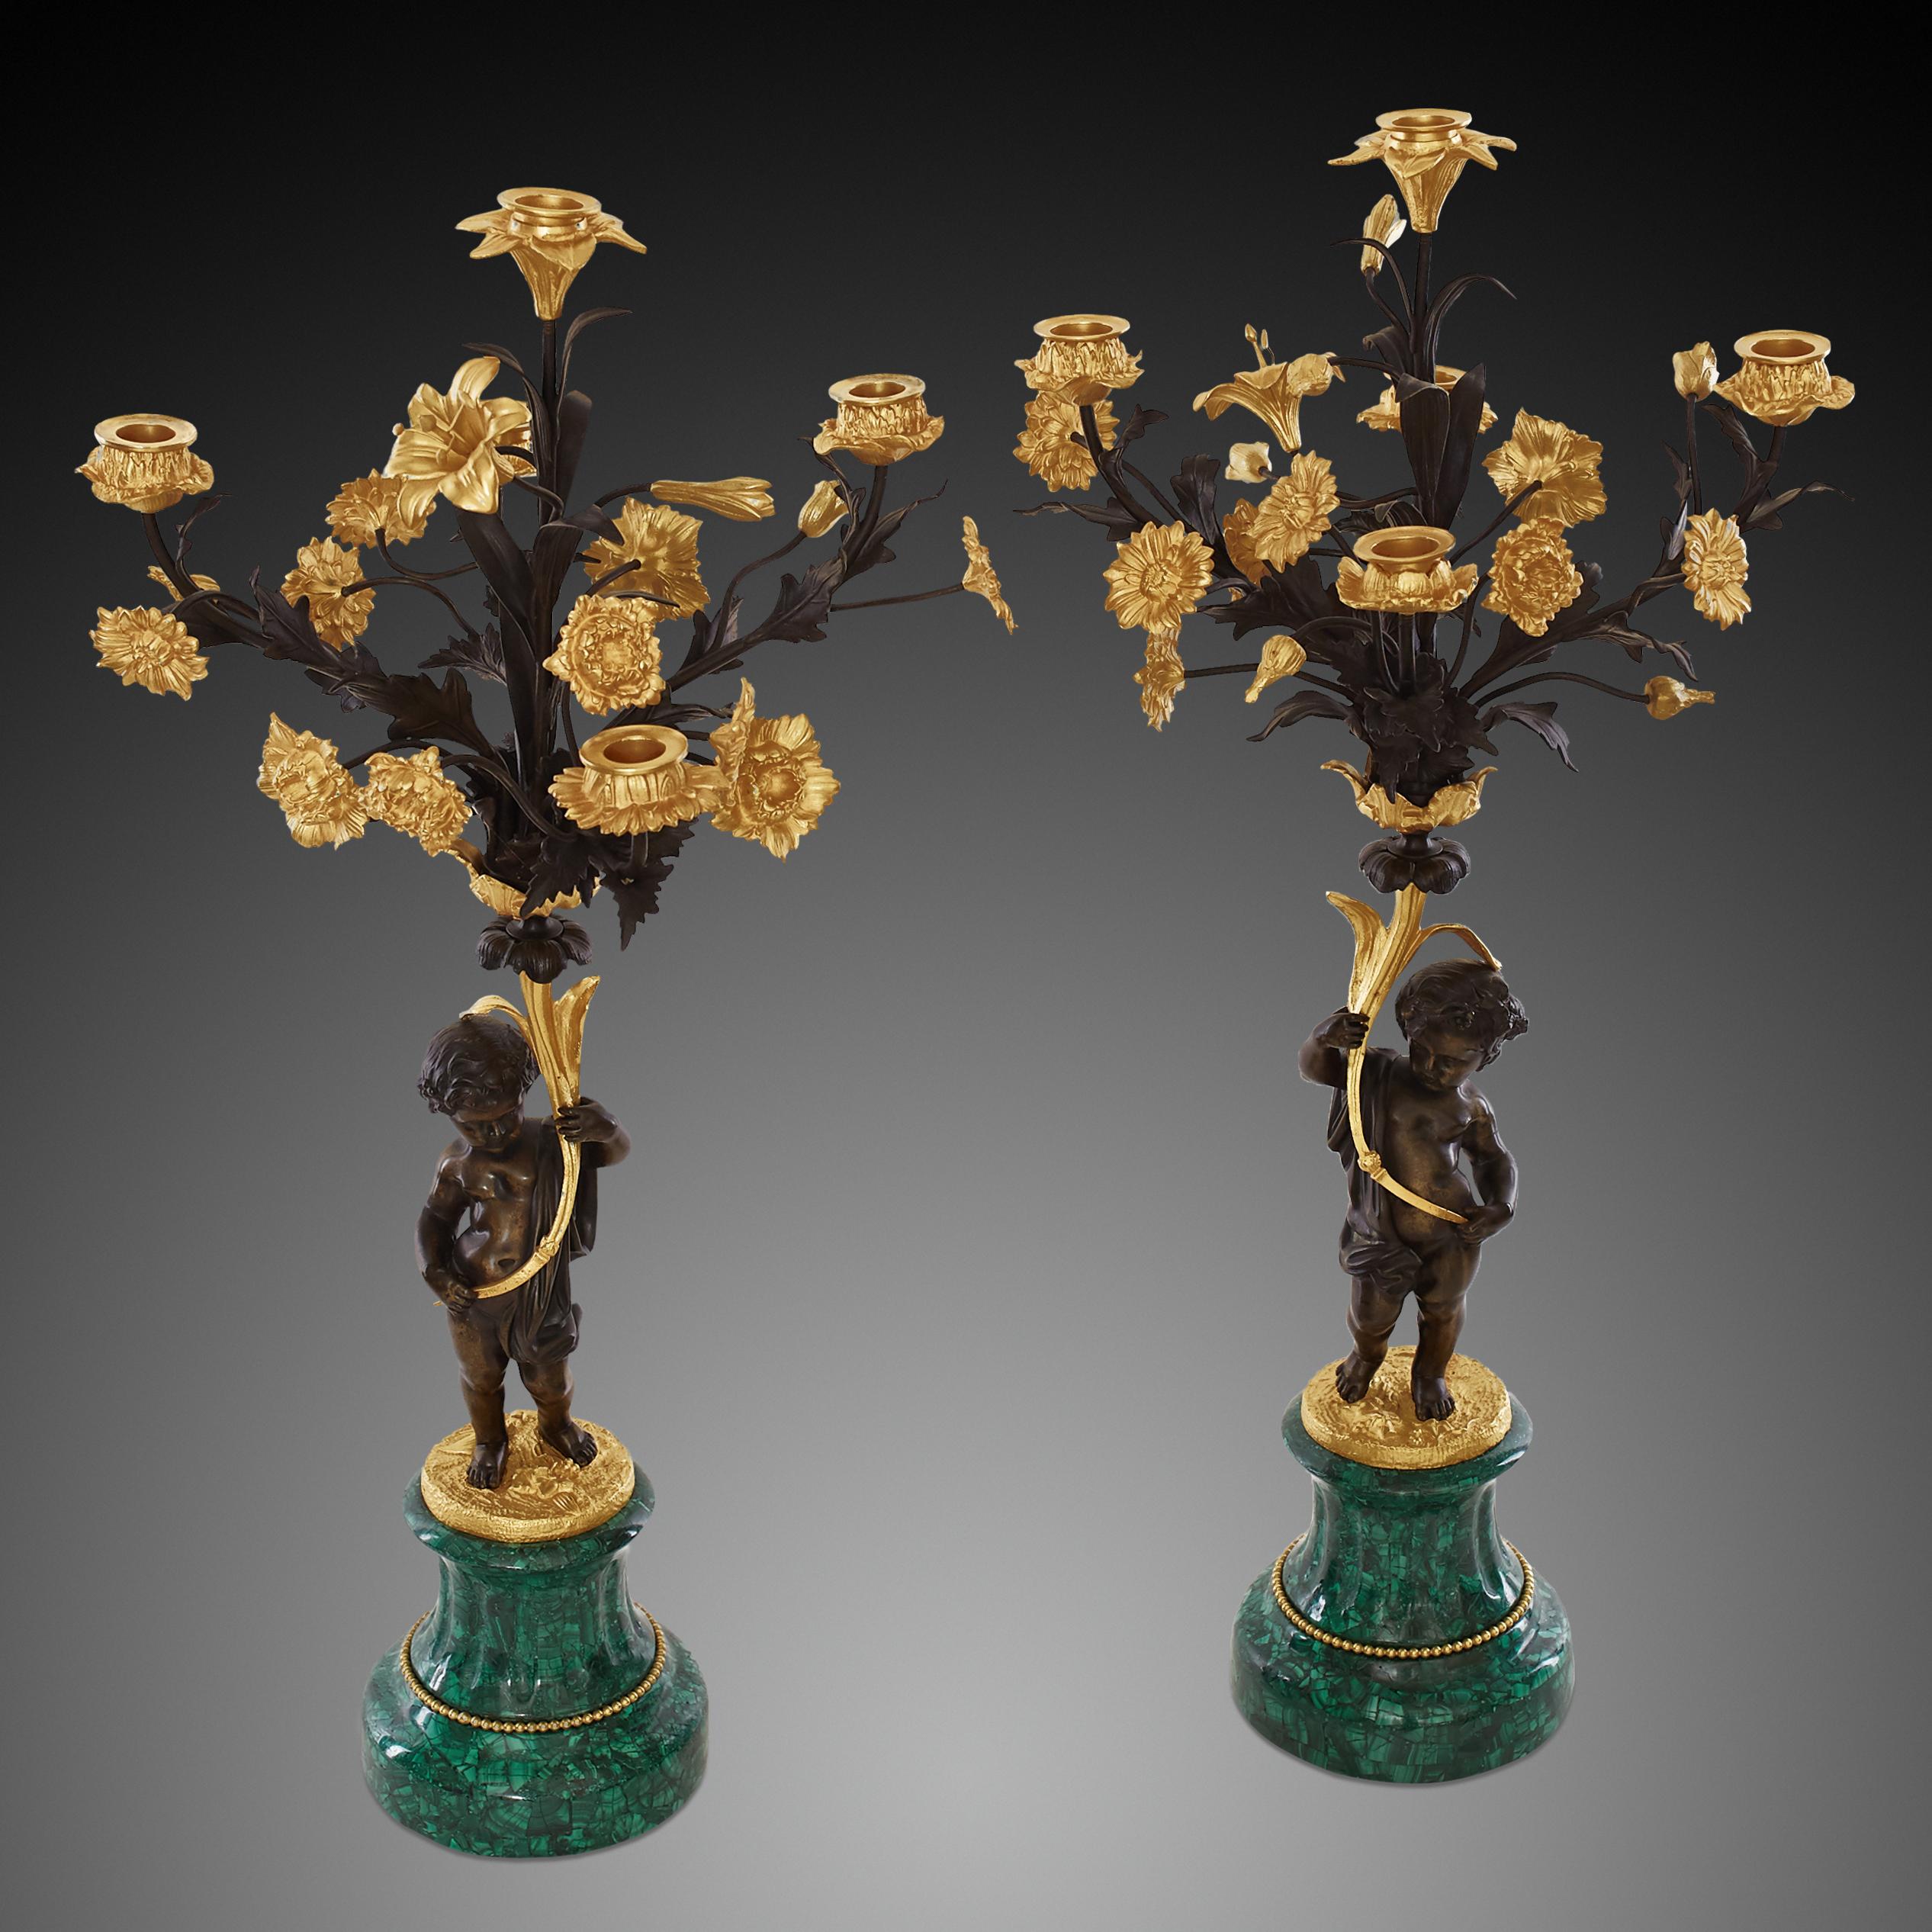 A pair of five-arm candlesticks
Napoleonic style.
Patinated bronze angels holding a bouquet of gilded bronze flowers
with curved and leafy arms. The whole stands on a base made of malachite. An important role here is played by beautifully made